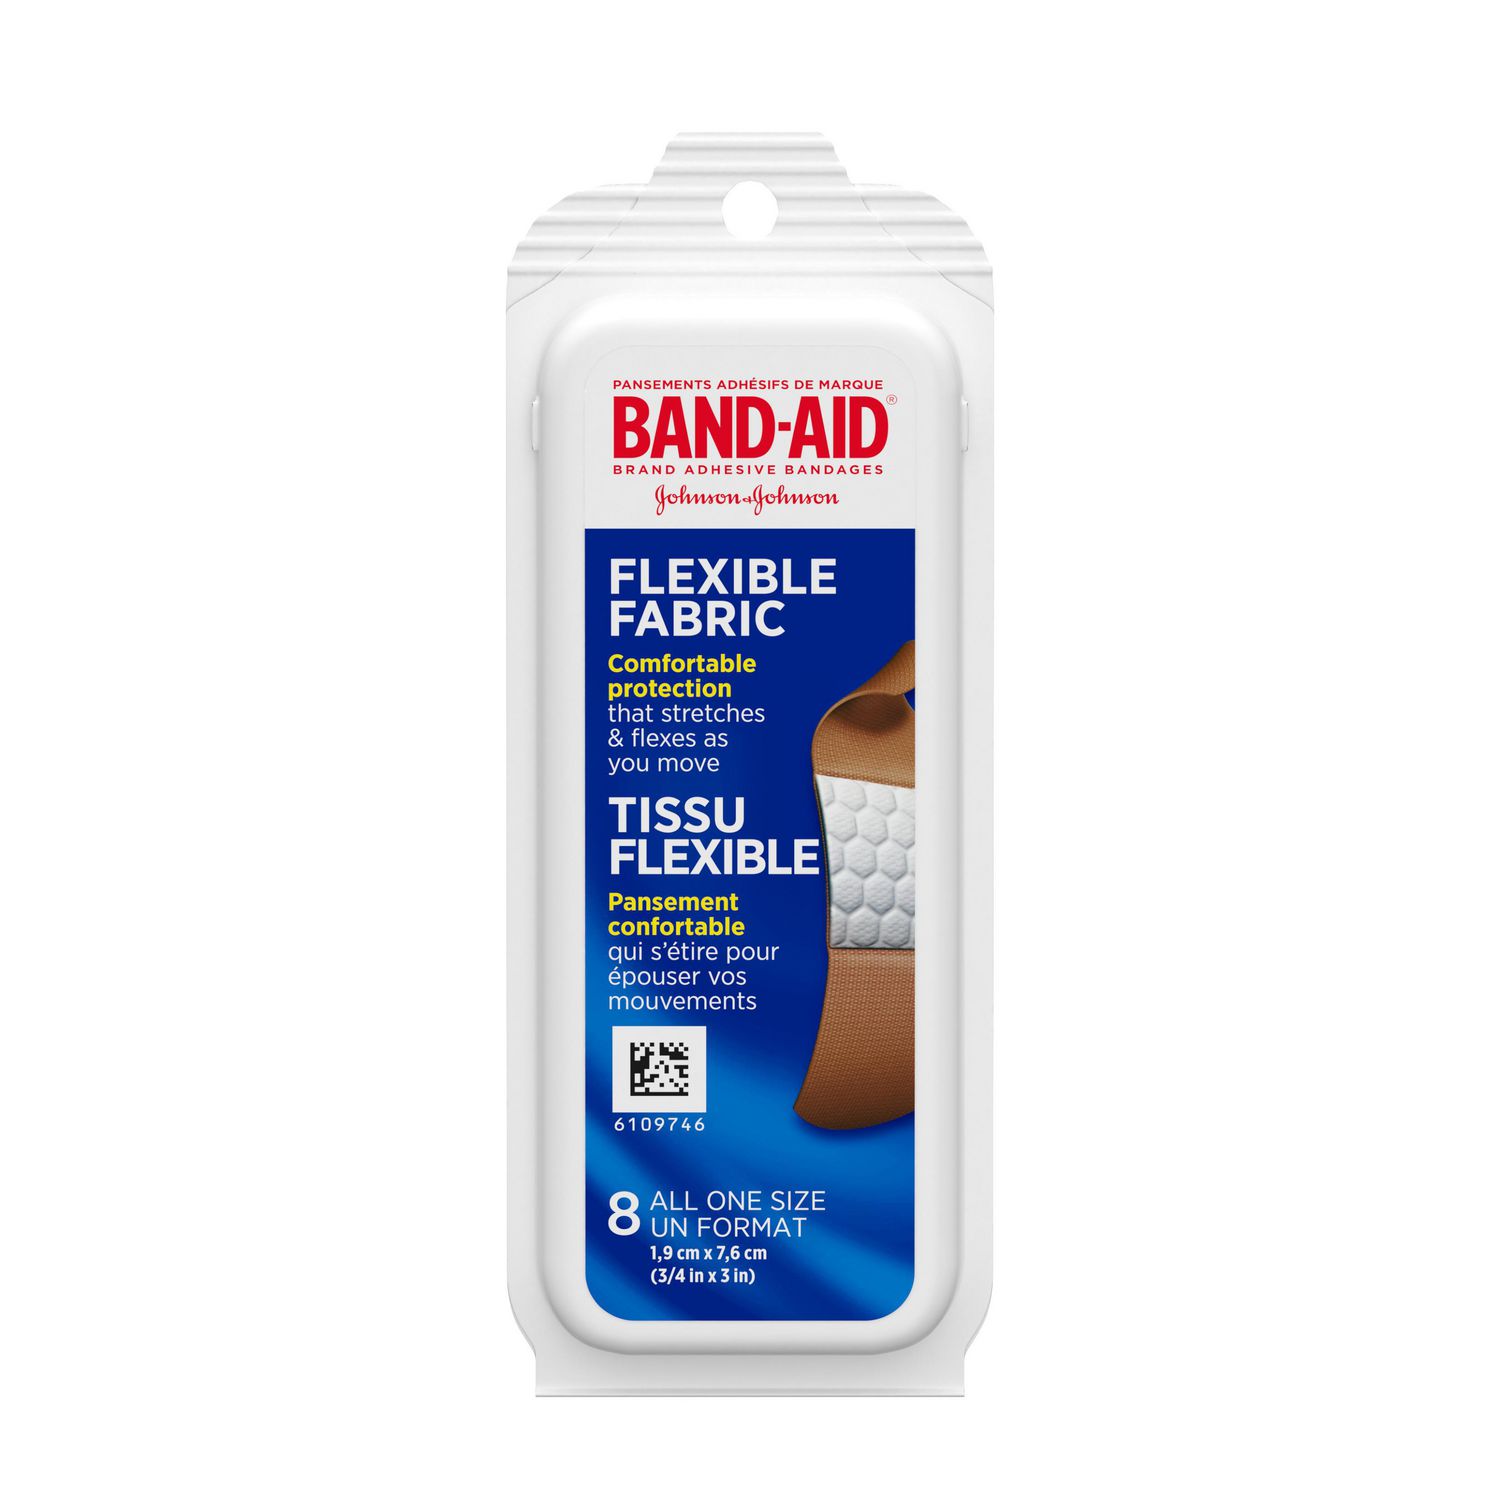 Band-Aid Brand Adhesive Bandages for Cuts and Scrapes, Skin-Flex